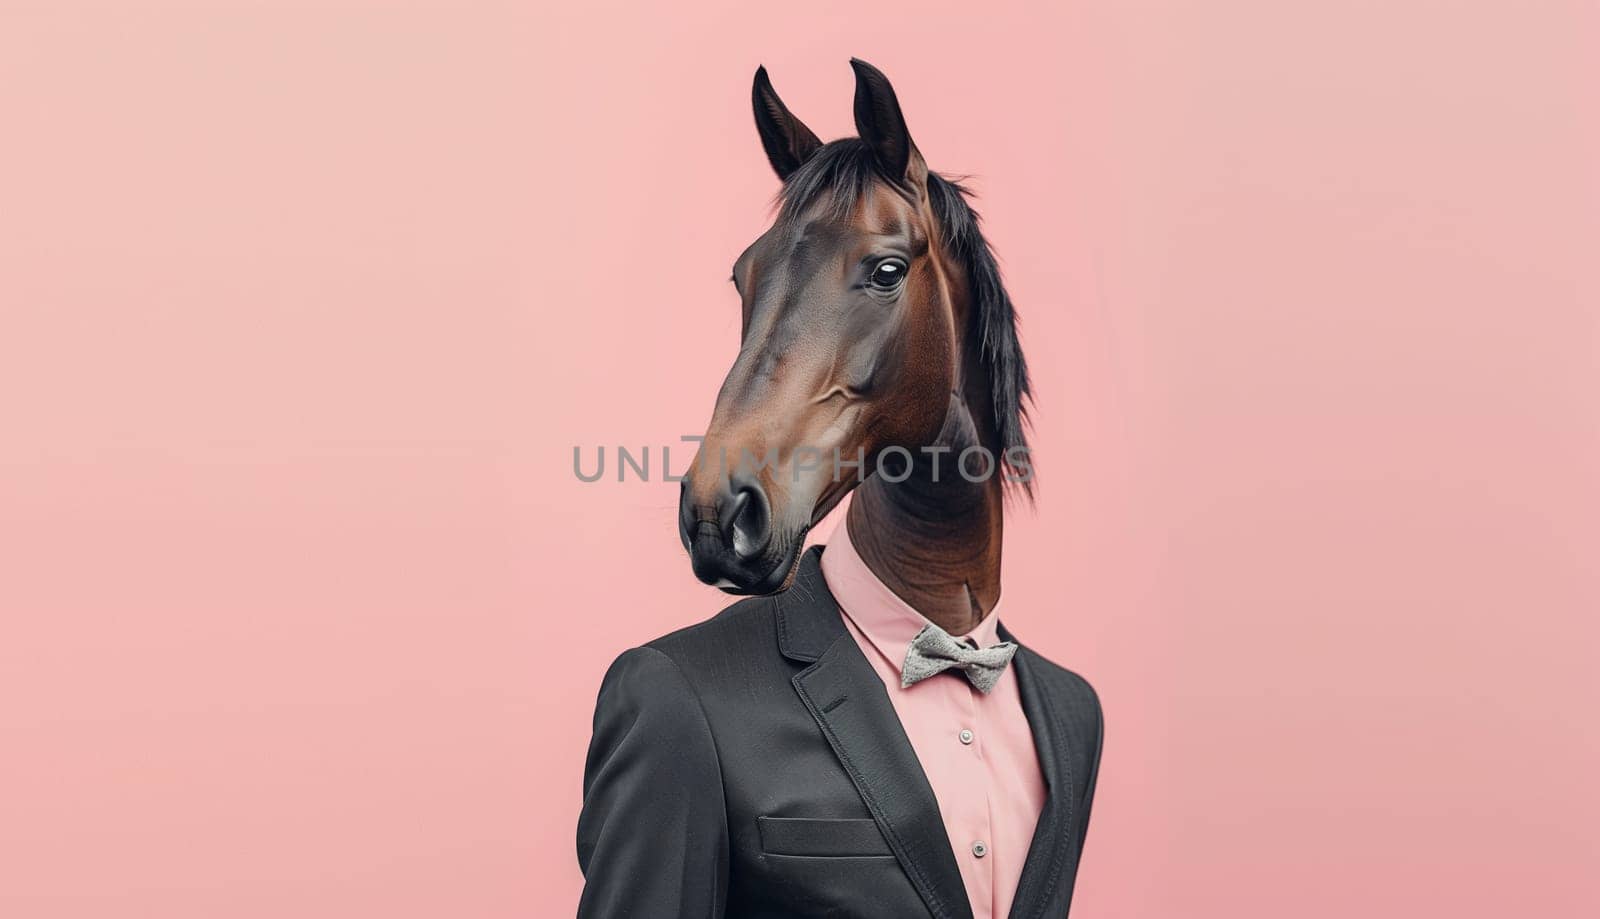 Stylish horse in a business suit looking away on a pink background, animal, creative concept by Rohappy